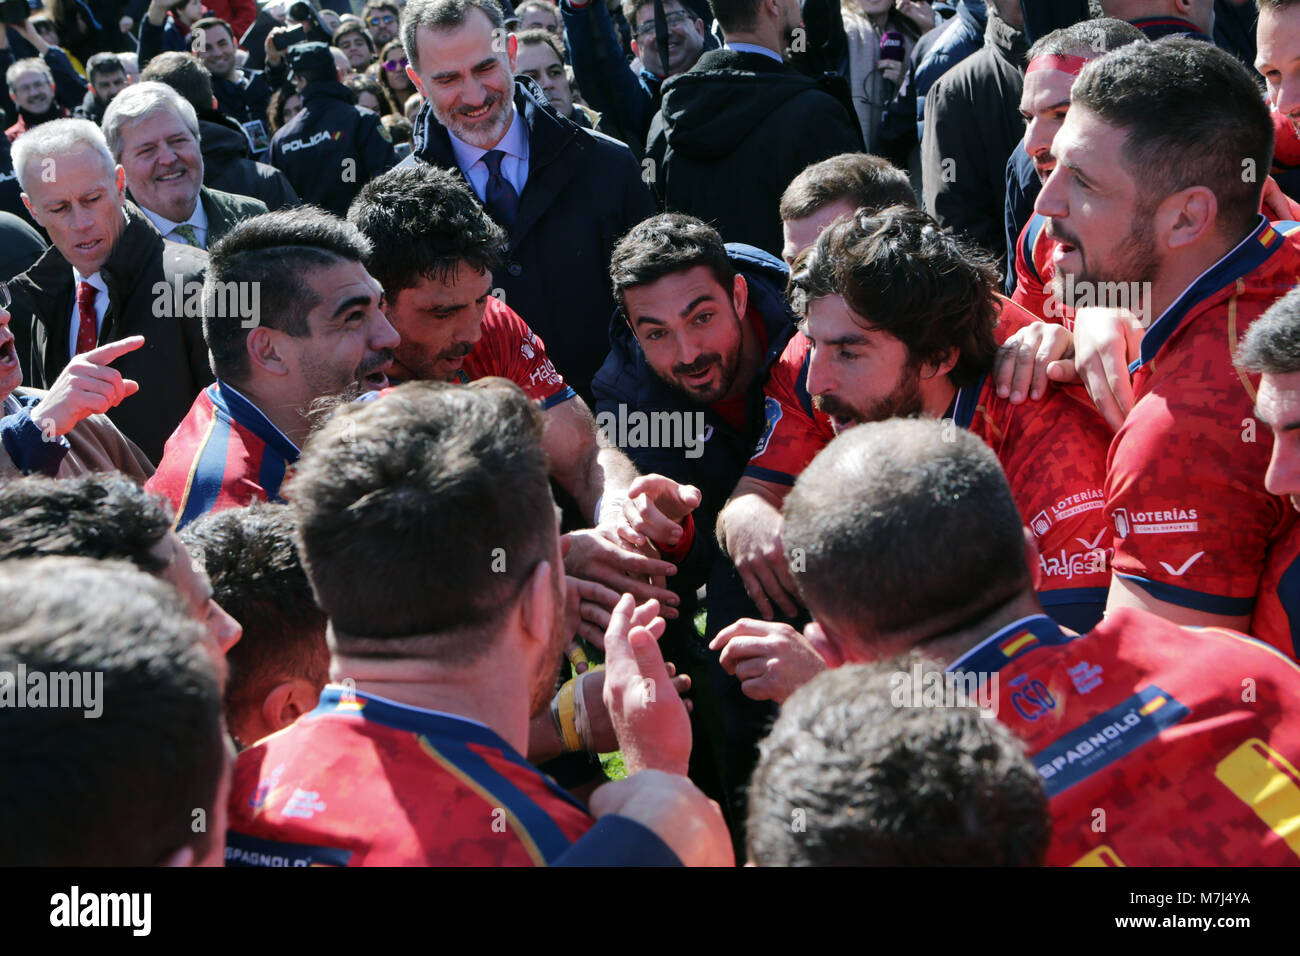 Madrid, Spain. 11th March, 2018. Spanish King Felipe VI during the match of rugby between Spain vs Germany in the Central of Complutense Madrid on Sunday 11 March 2018. Spain won (84-10) Germany. Credit: Gtres Información más Comuniación on line, S.L./Alamy Live News Stock Photo